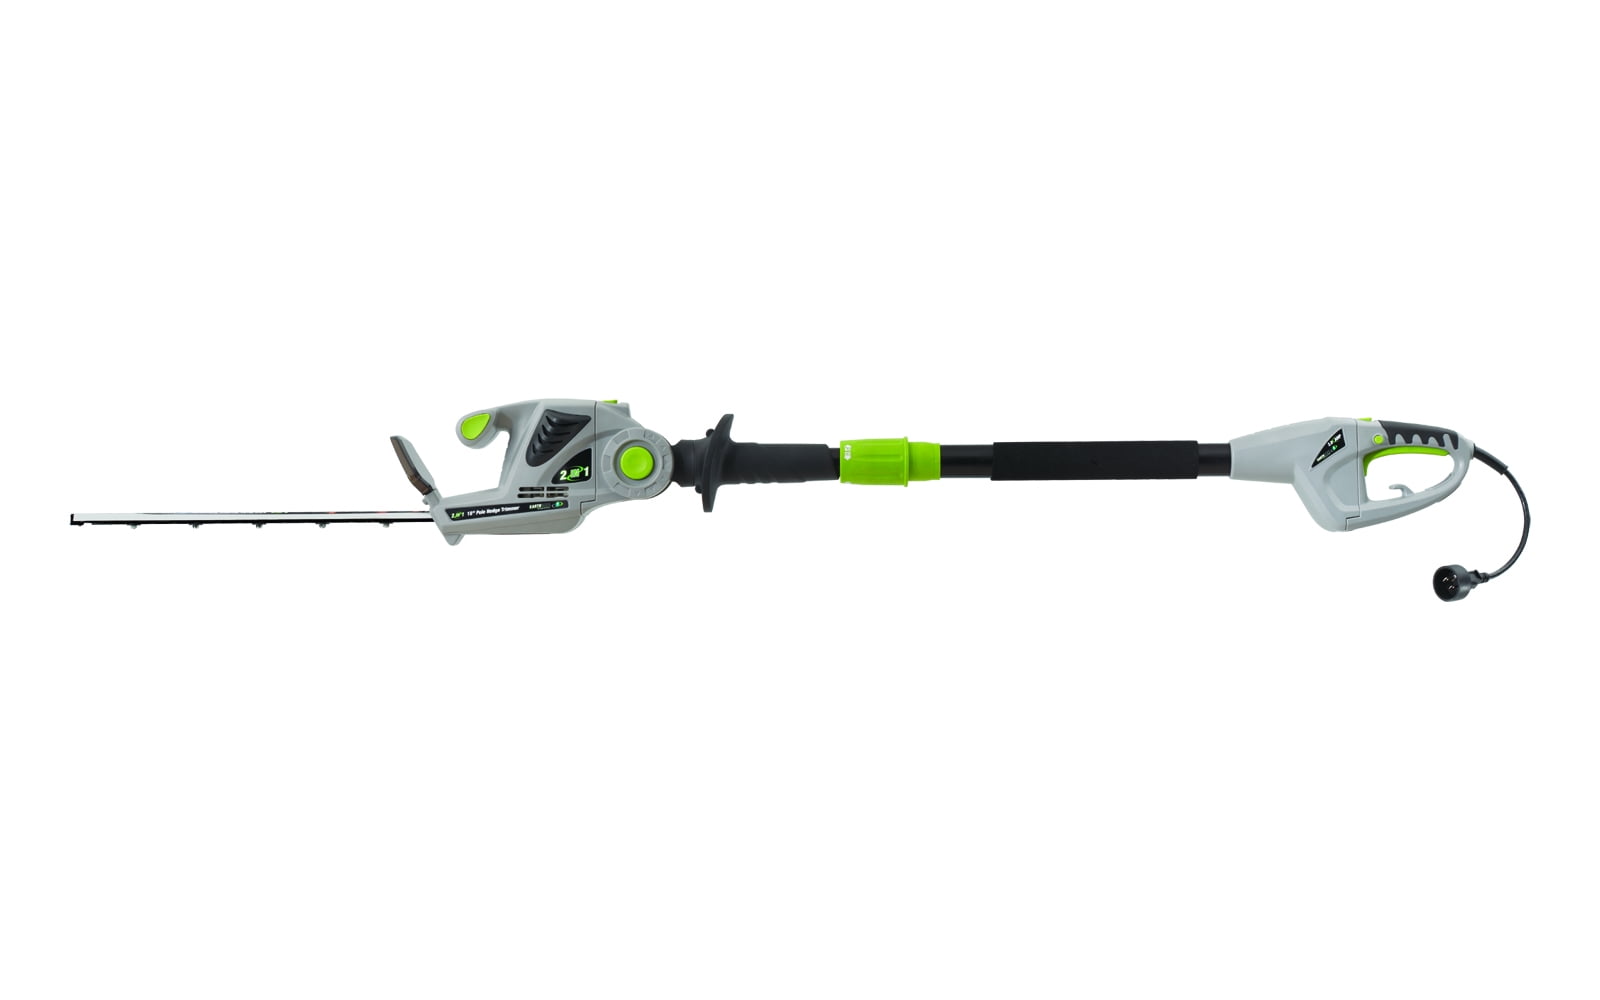 harbor freight pole hedge trimmer